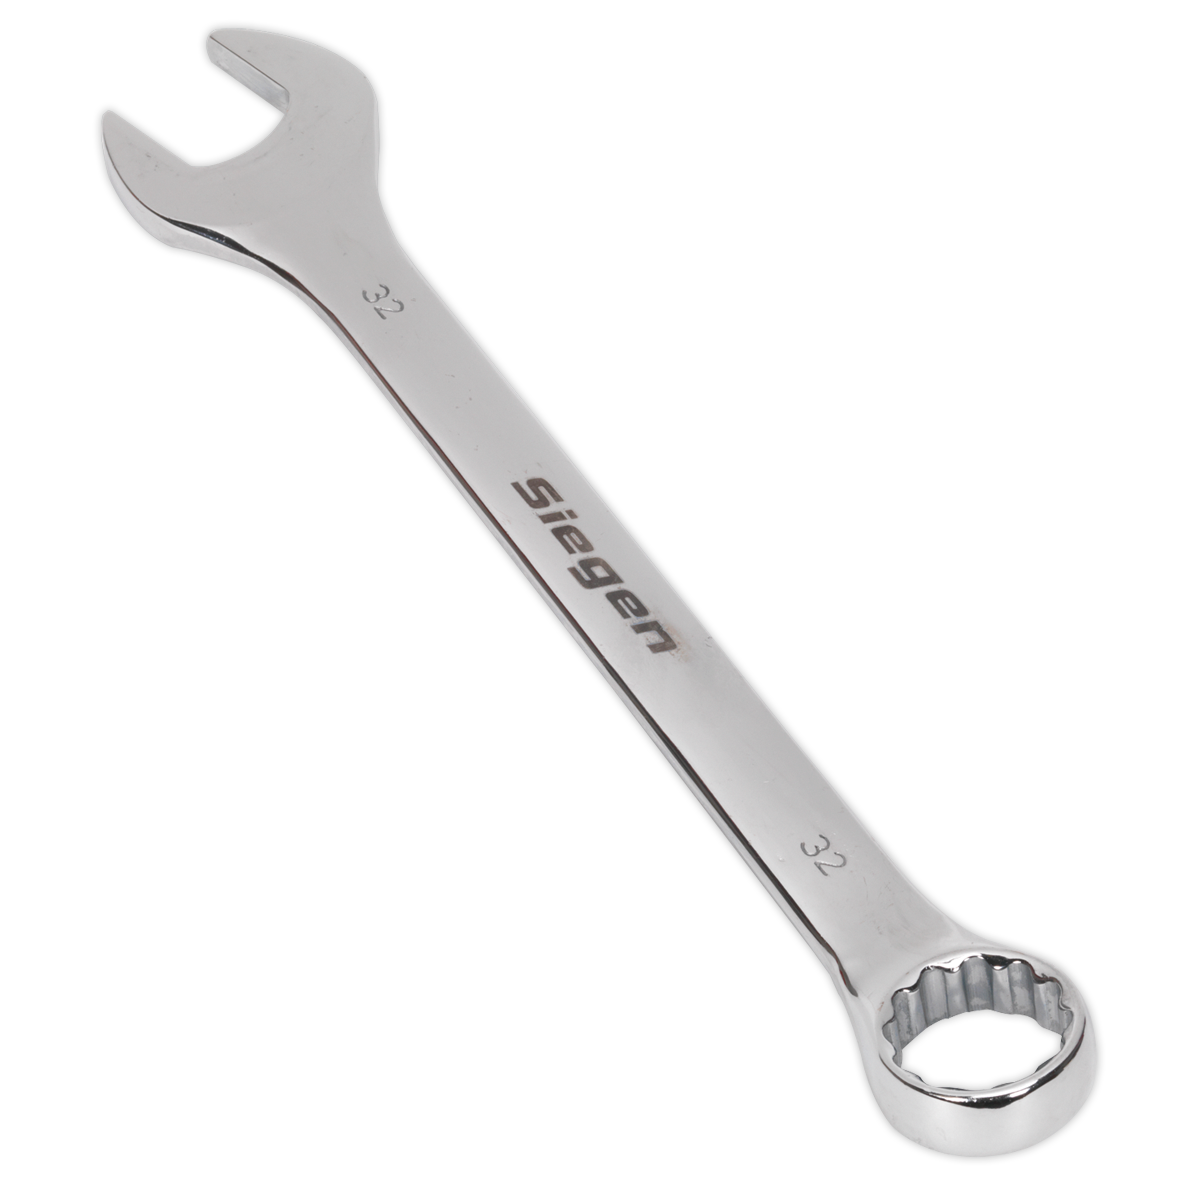 Sealey S01032 Combination Spanner 32mm